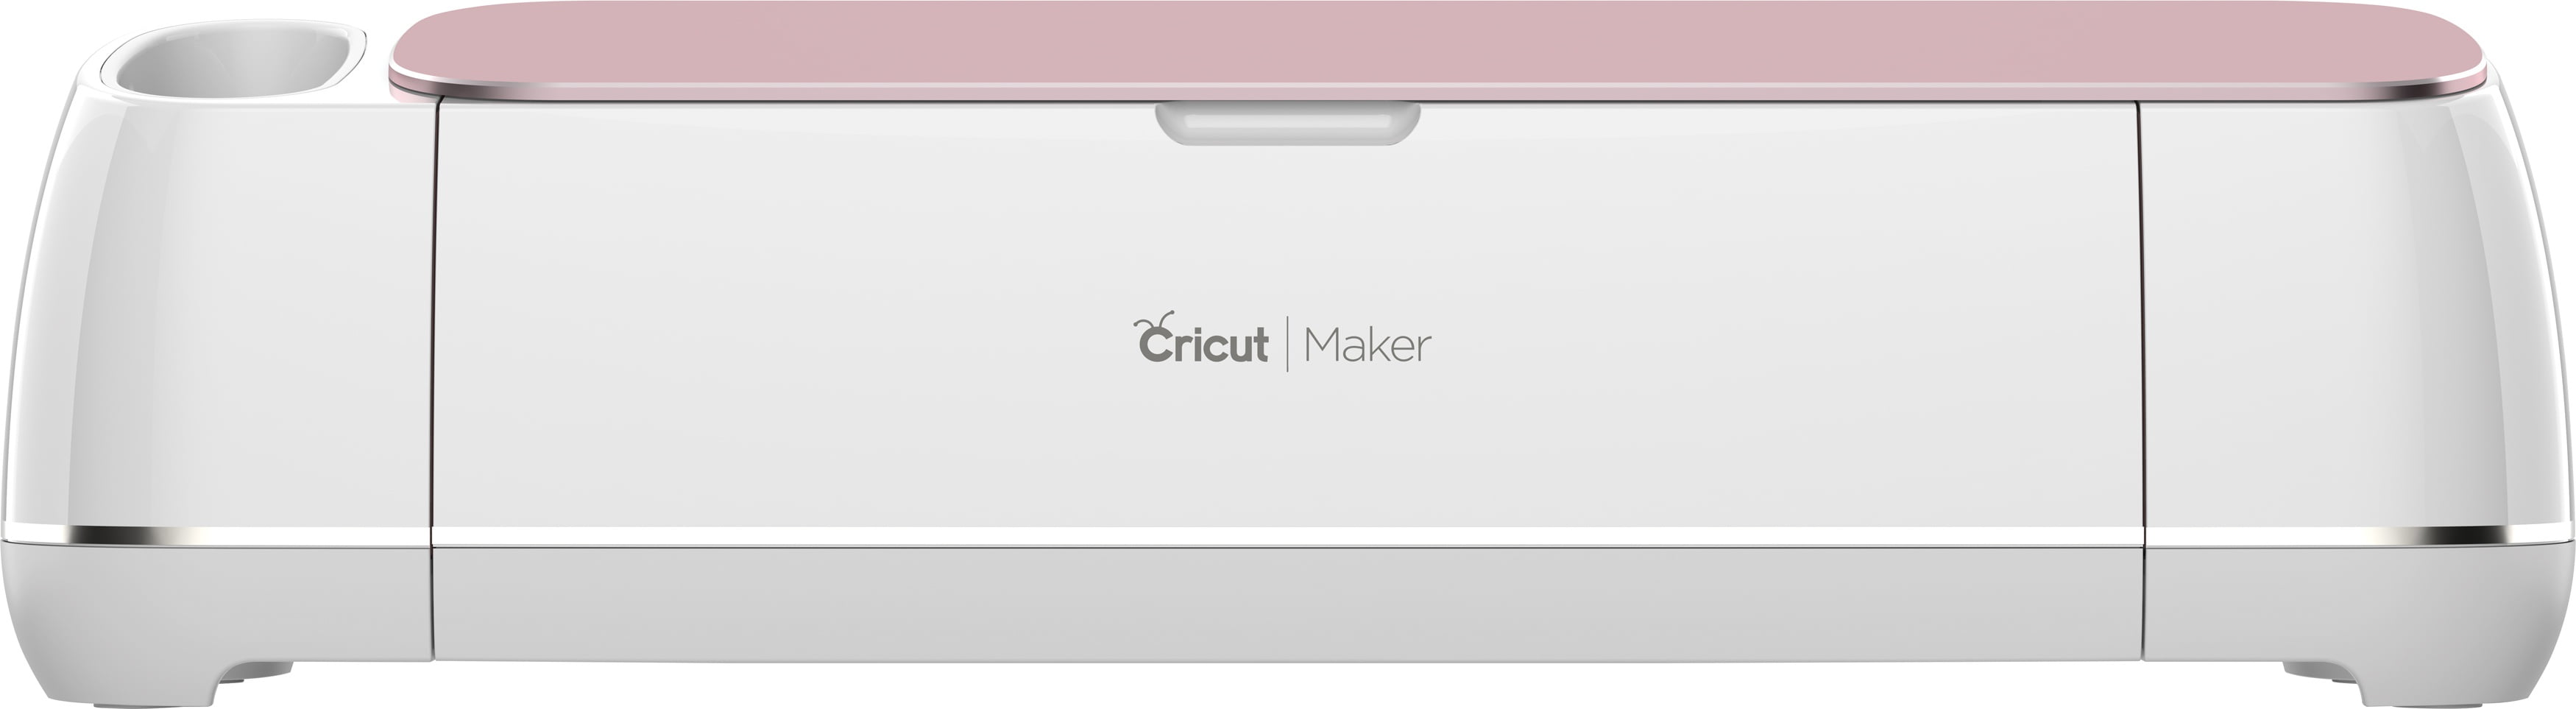 Cricut Maker 3 Die Cutting Machine With Free Cricut Tools Included  810109111176 